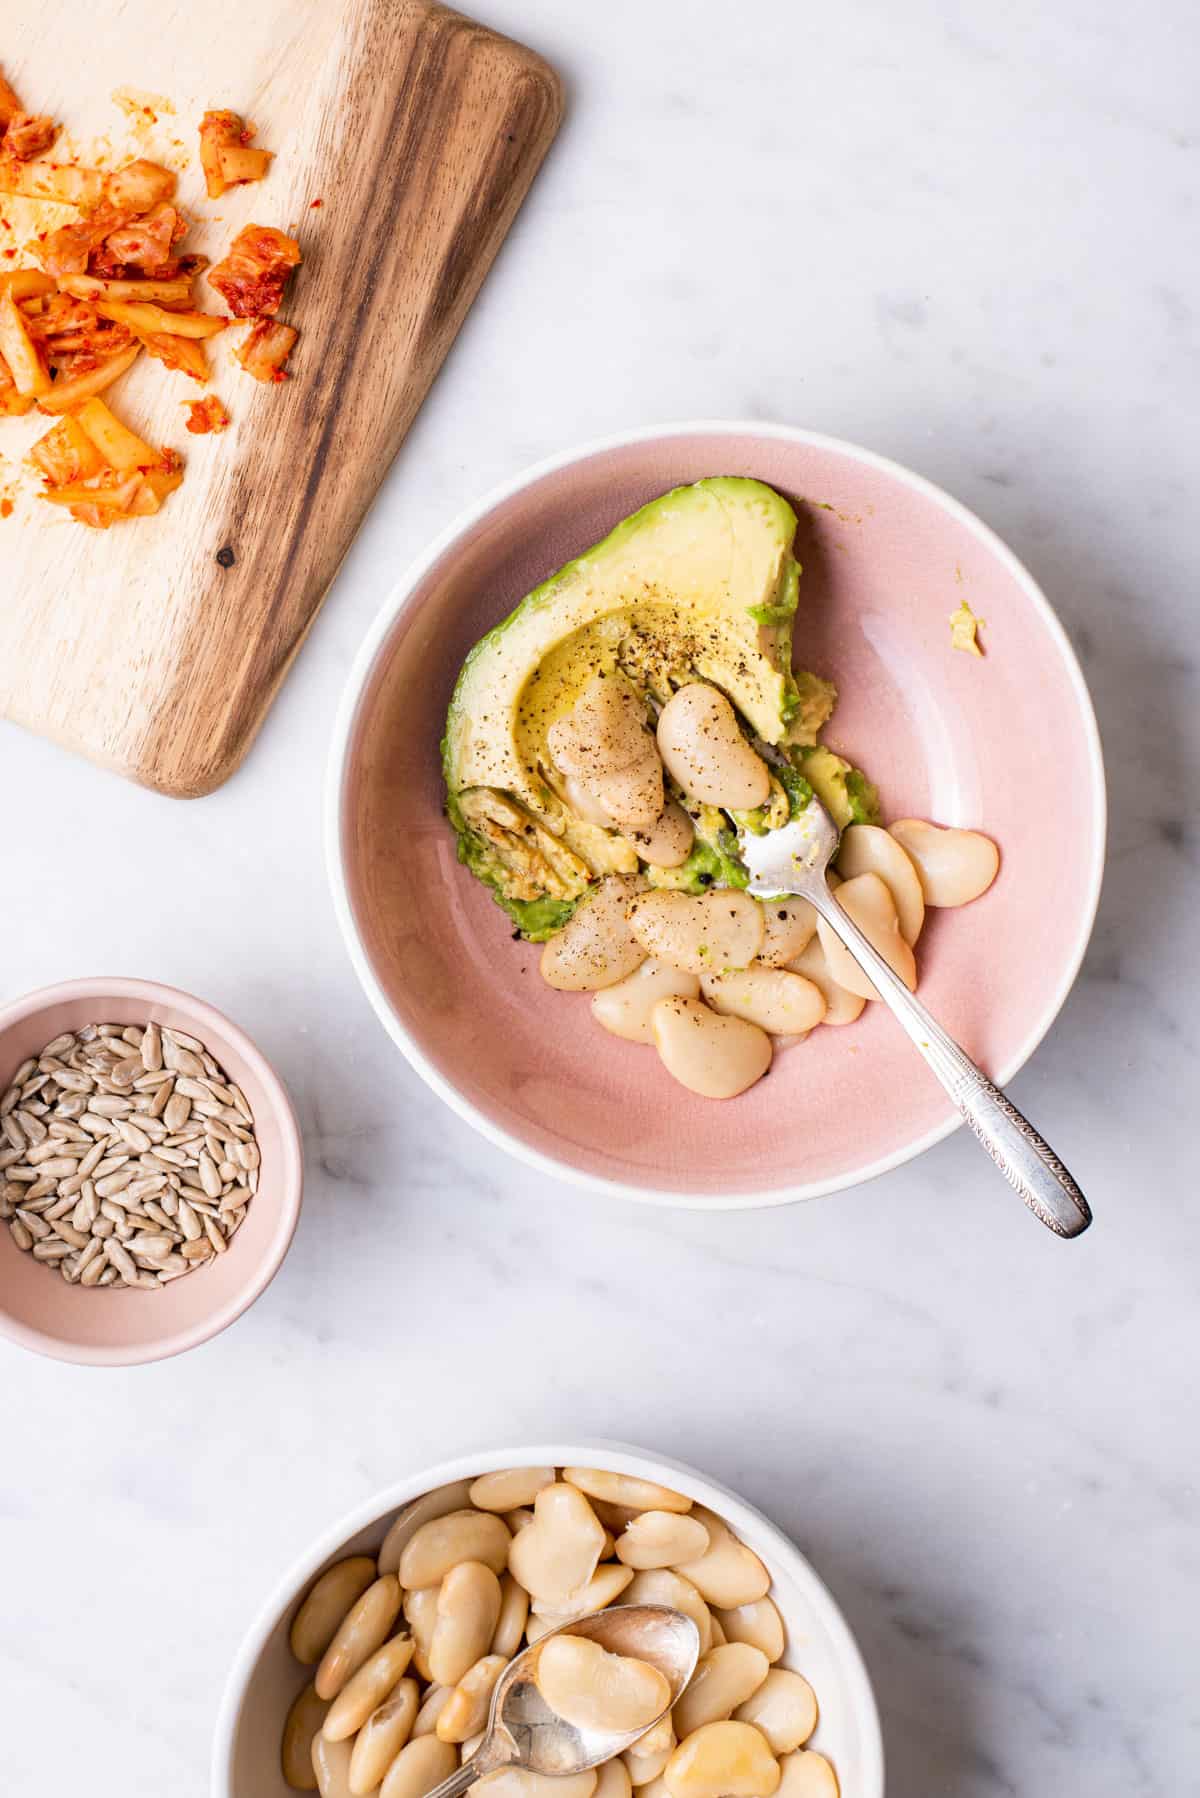 Mashing avocado with butter beans in a pink bowl.